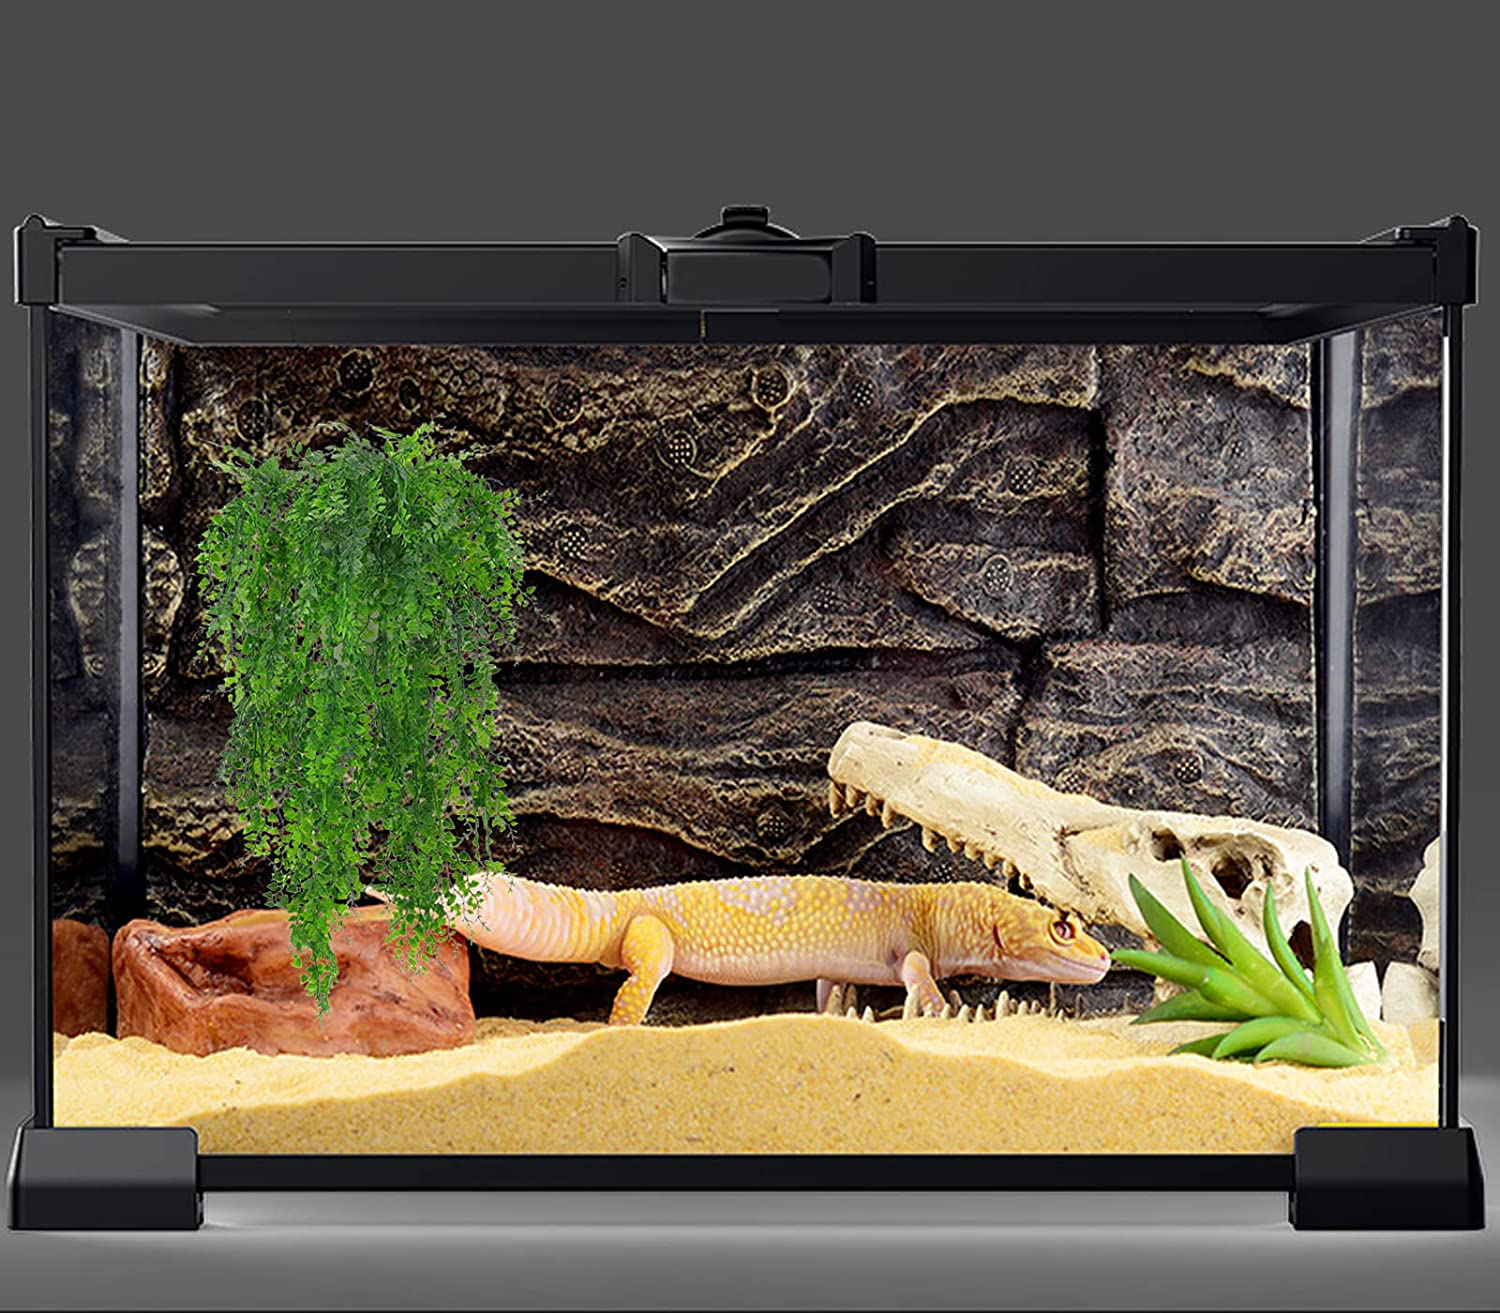 HERCOCCI 2 Pack Reptile Plants, Terrarium Hanging Plants Vines Artificial Leaves Habitat Decorations with Suction Cup for Bearded Dragon Hermit Crab Lizard Snake Geckos Chameleon Animals & Pet Supplies > Pet Supplies > Reptile & Amphibian Supplies > Reptile & Amphibian Habitats HERCOCCI   